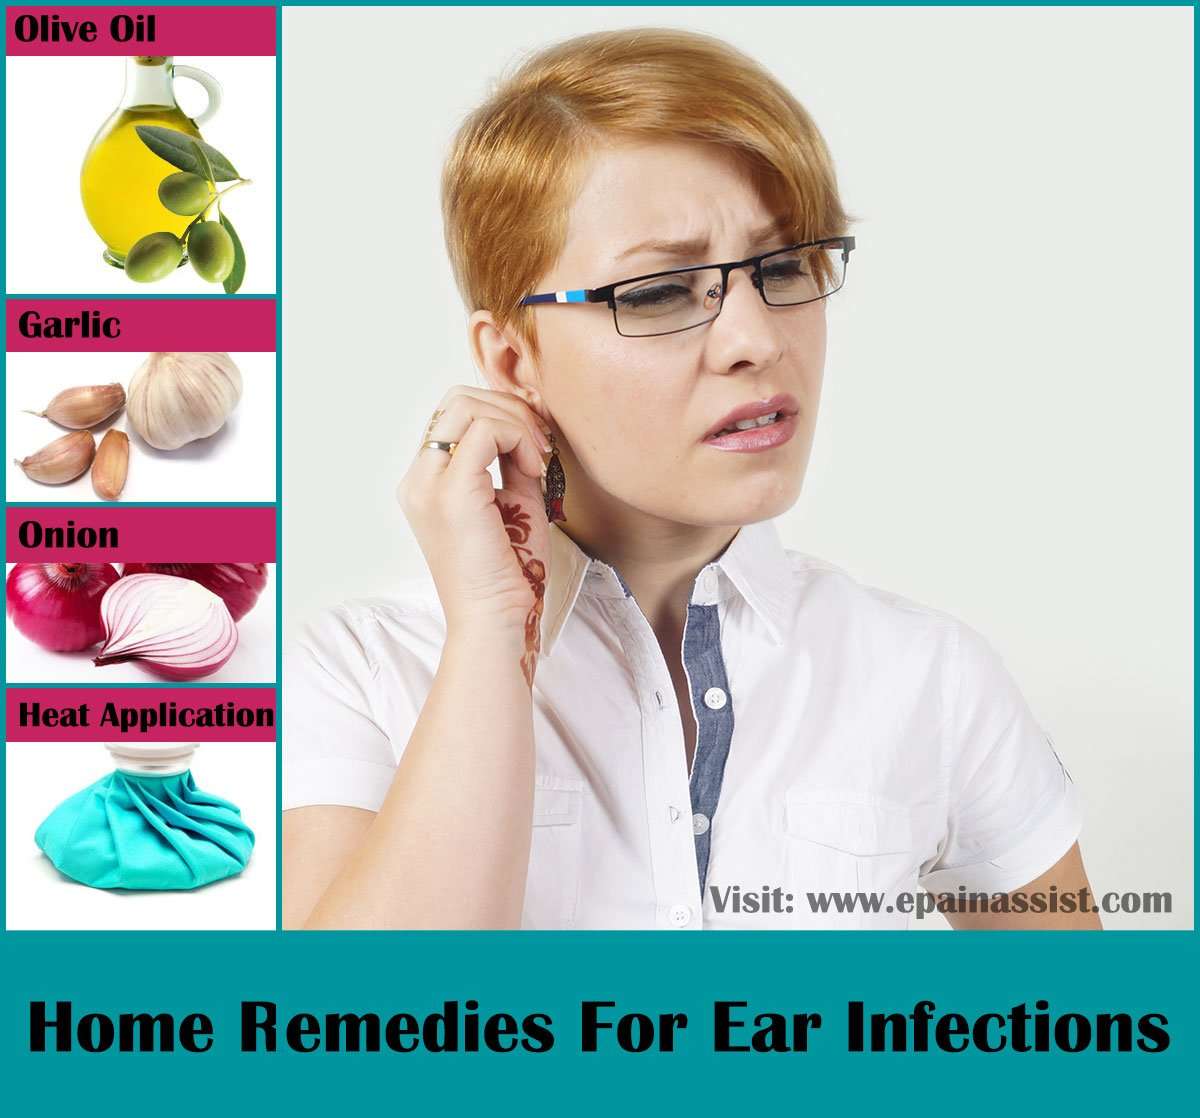 Home Remedies for Ear Infections, Ear Swelling, Pain ...